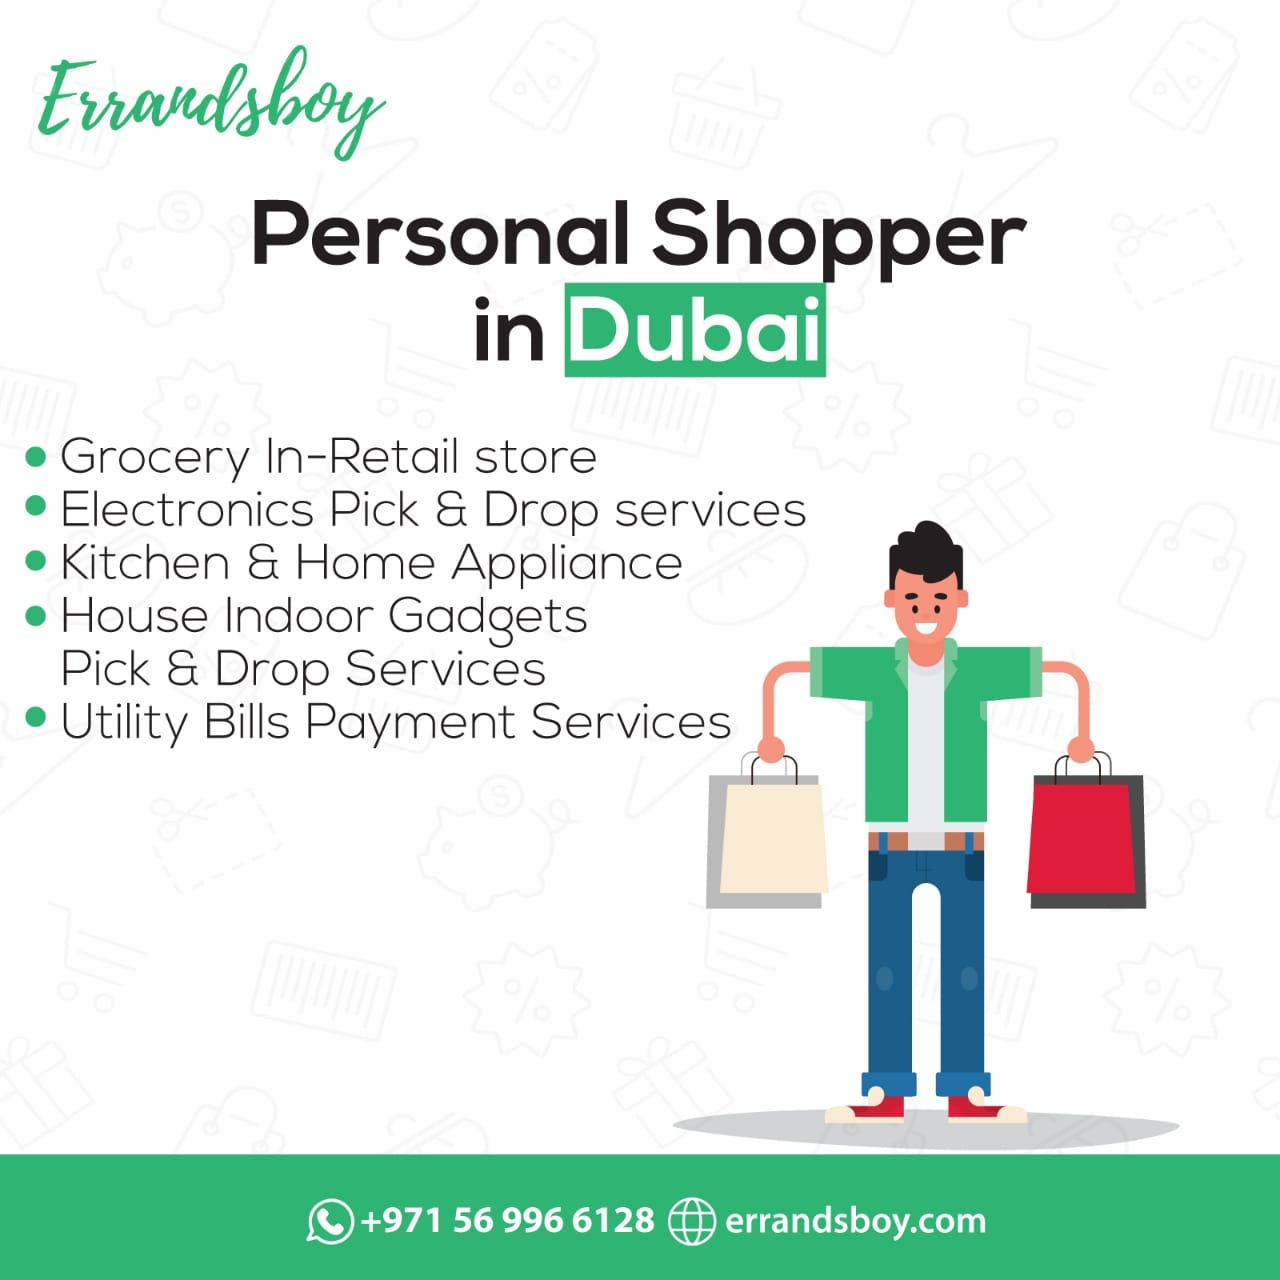 Are You Looking For The Best Personal Shopper Services In Dubai